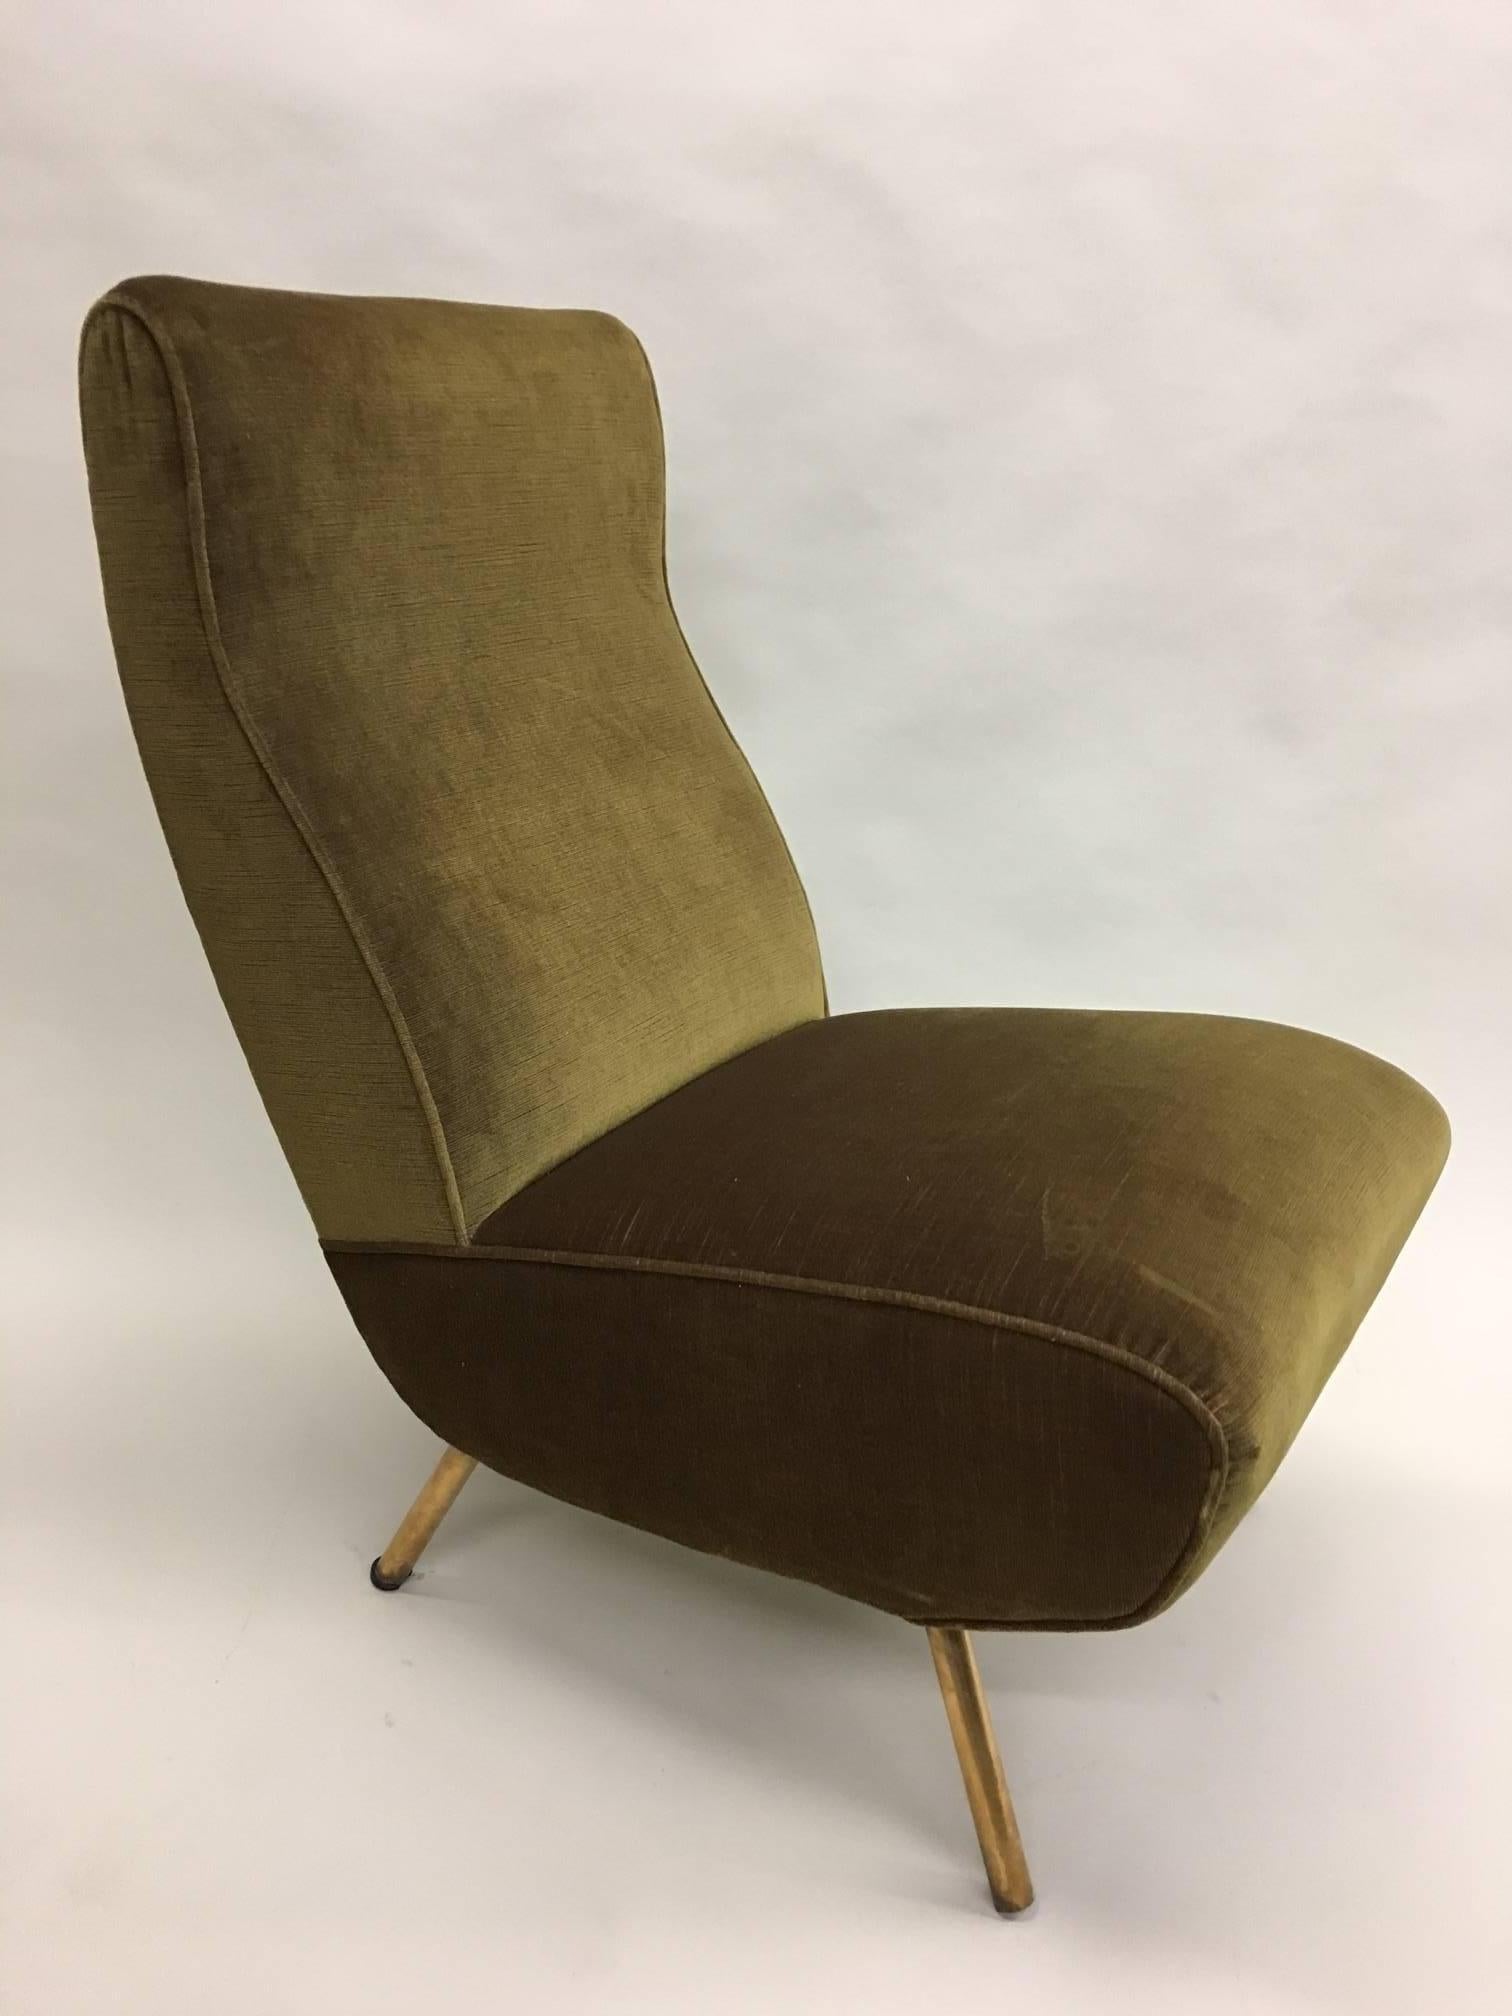 Italian Rare Pair of Mid-Century Modern Triennale Lounge Chairs, Marco Zanuso Italy 1951 For Sale